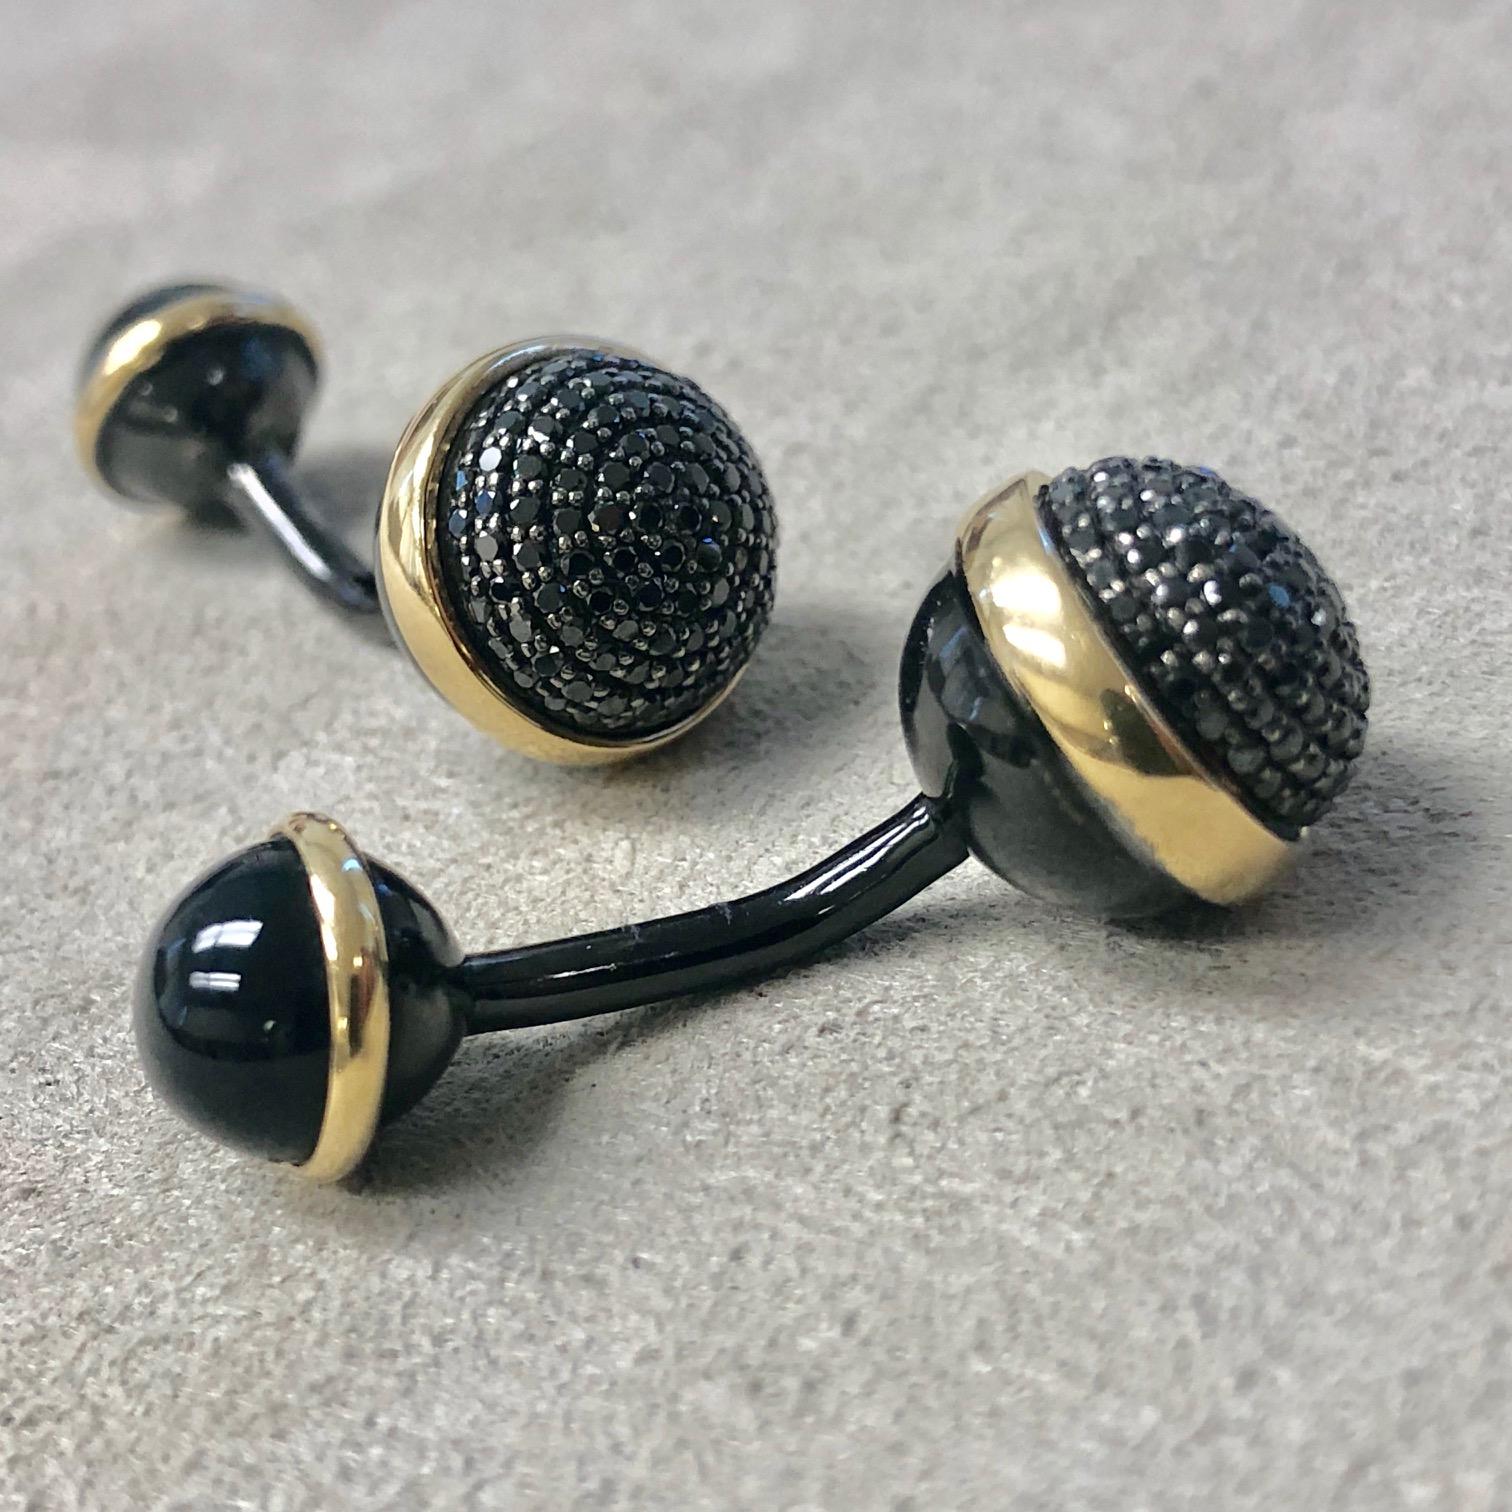 Created in 18 karat yellow gold & oxidized silver
Black diamonds 1.10 cts approx
Black onyx backs 2 cts approx
Limited edition
Perfect for gifting


About the Designers ~ Dharmesh & Namrata

Drawing inspiration from little things, Dharmesh & Namrata